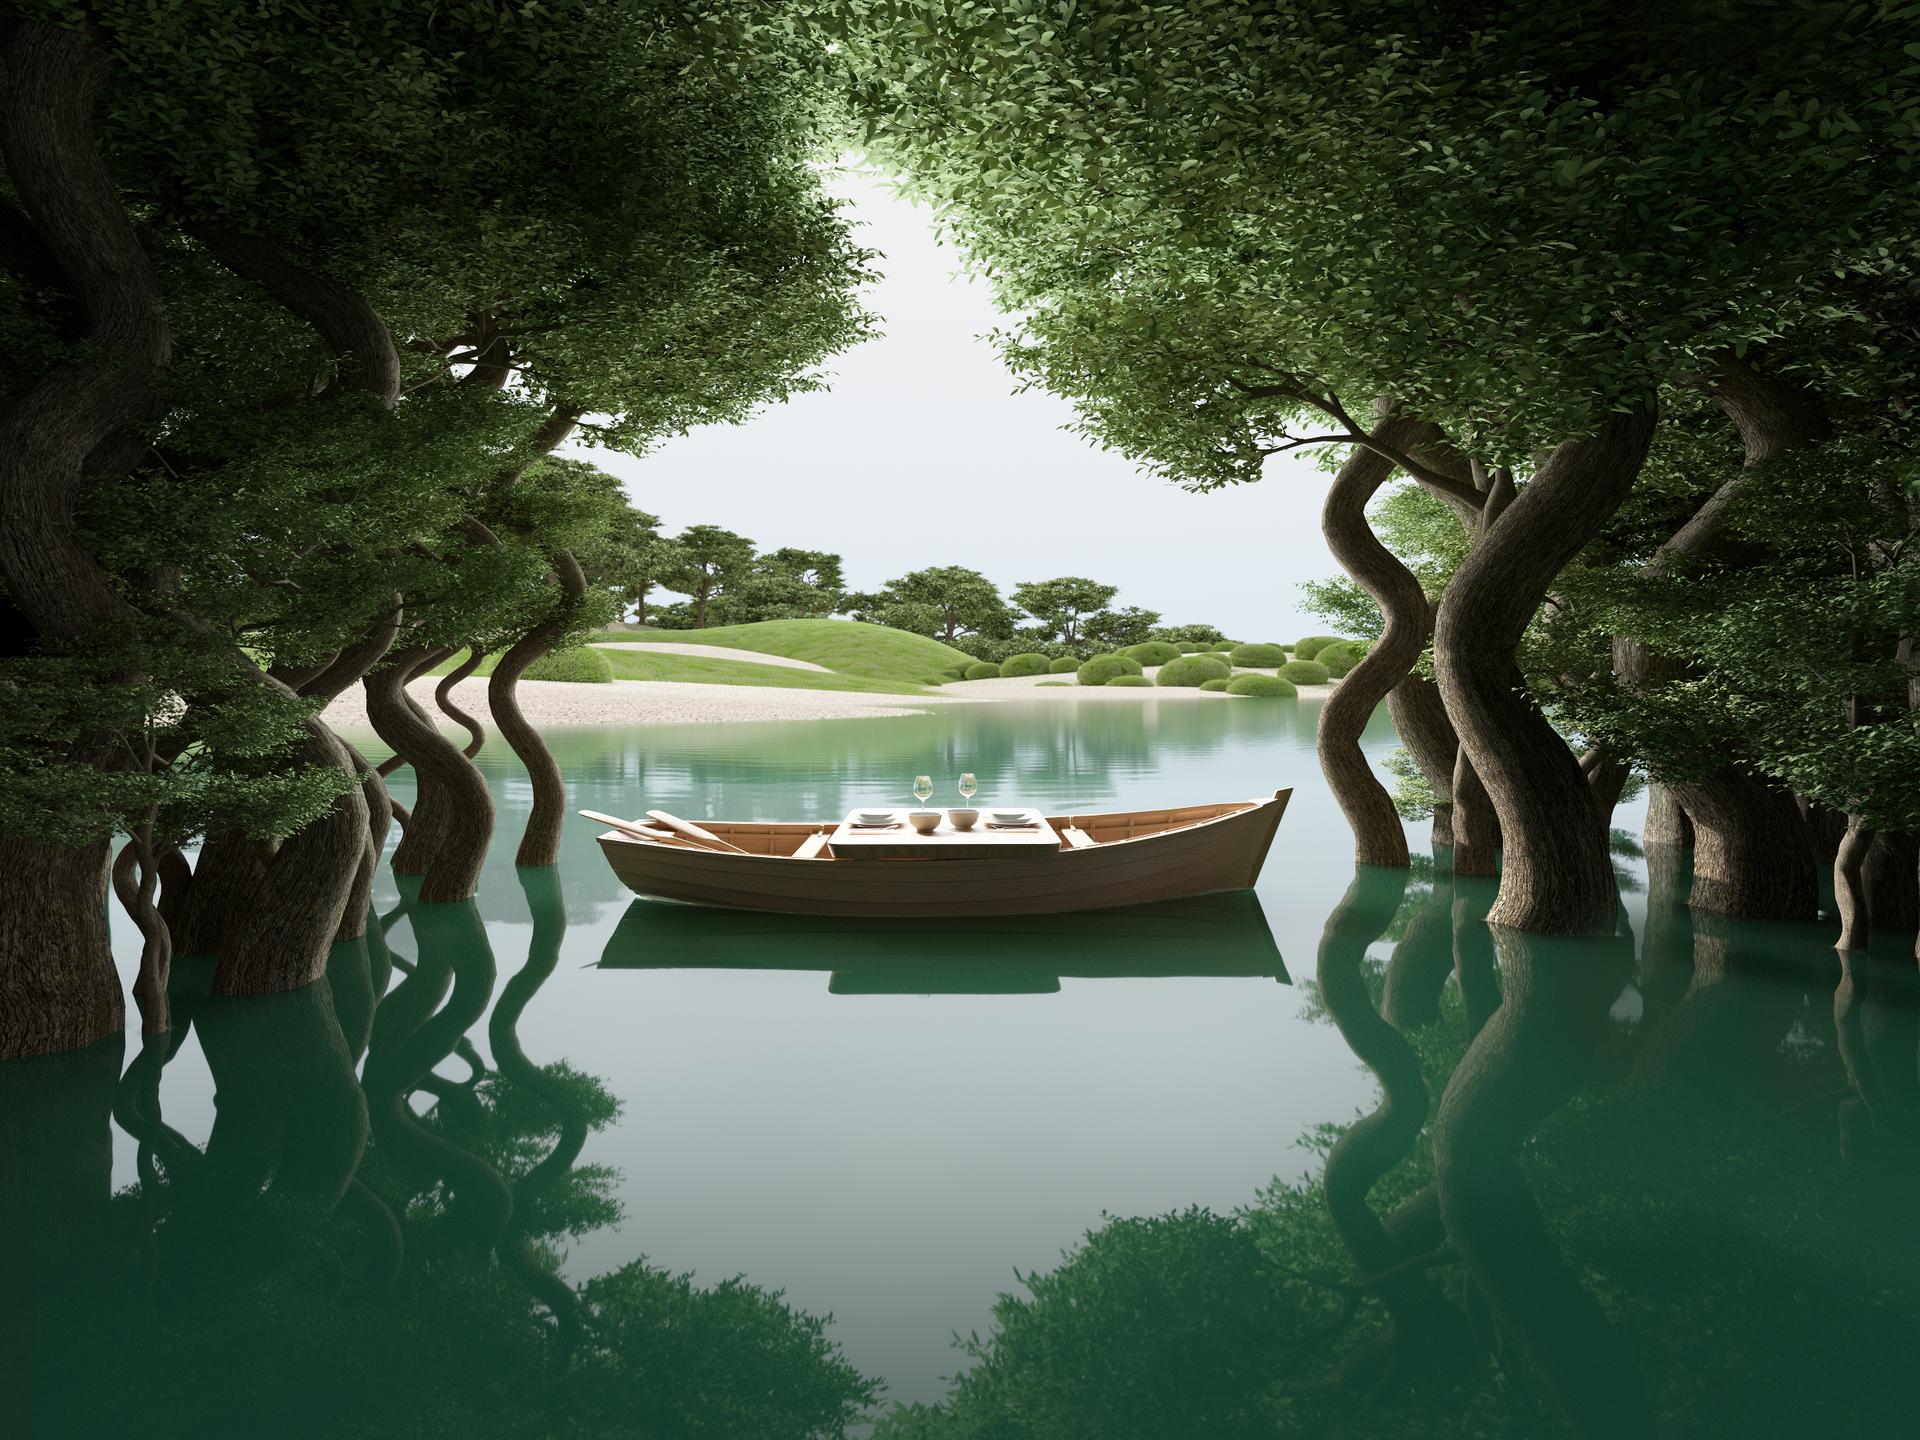 Lunch in a boat by Six N. Five